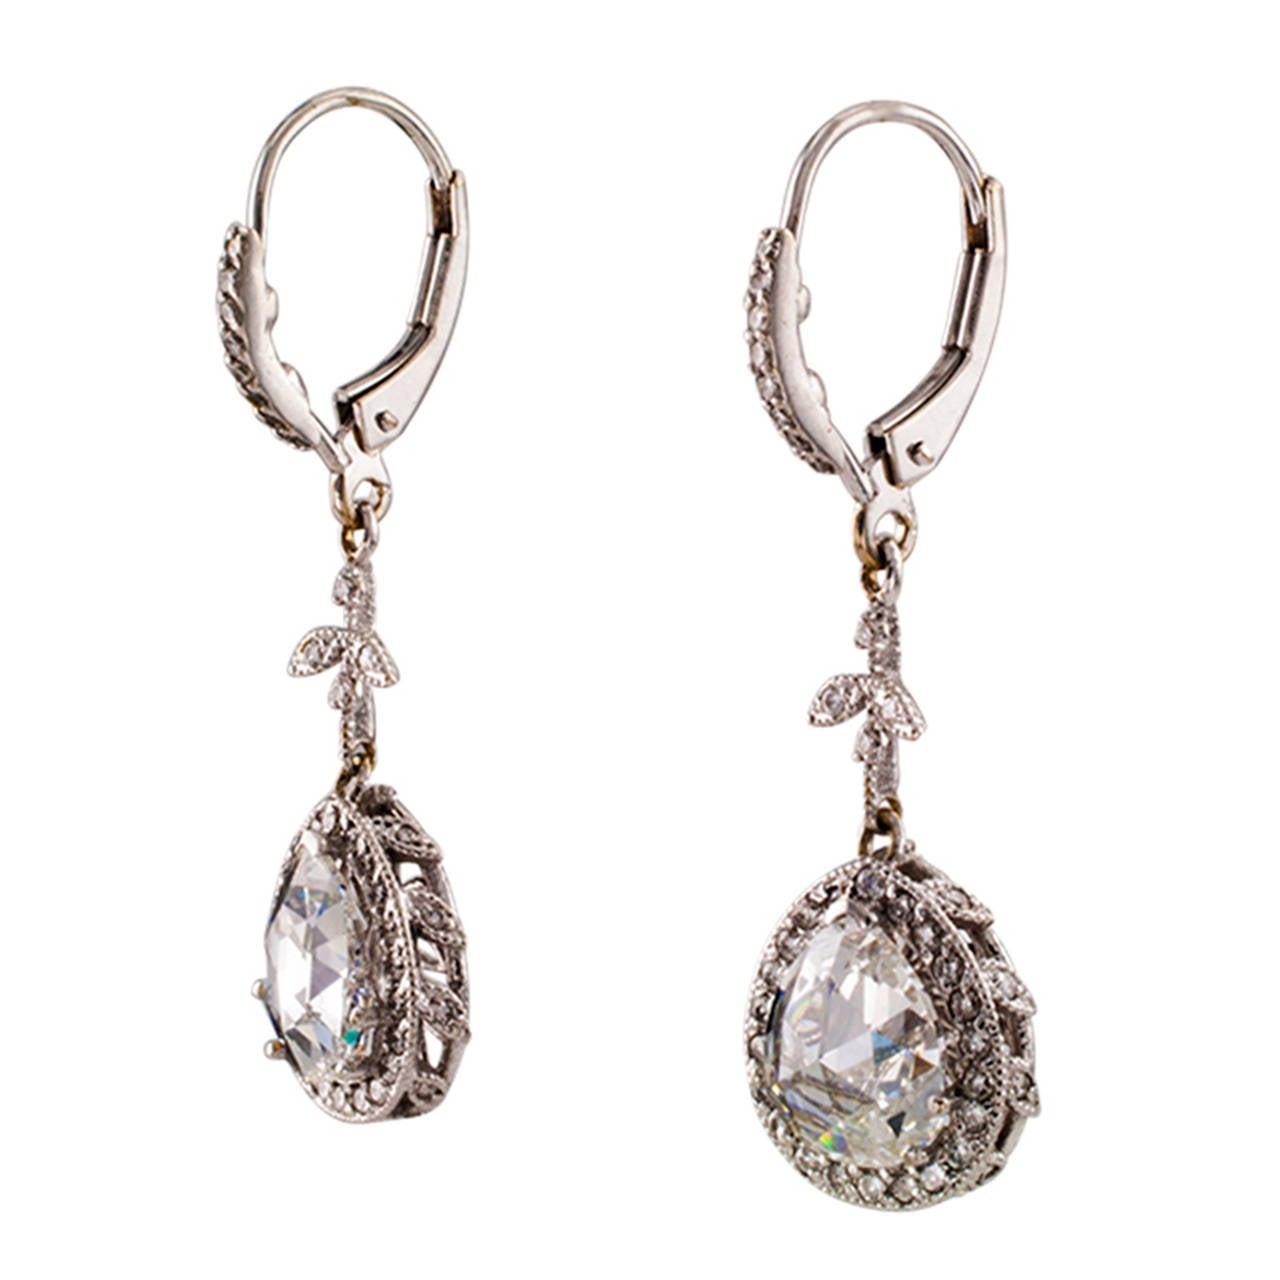 2.25 Carats t.w. Pear-Shaped Rose-Cut Diamond Drop Earrings

The contemporary swinging designs feature a pair of fiery and bright pear-shaped rose-cut diamonds together weighing approximately 2.25 carats, approximately F - G color and SI clarity,